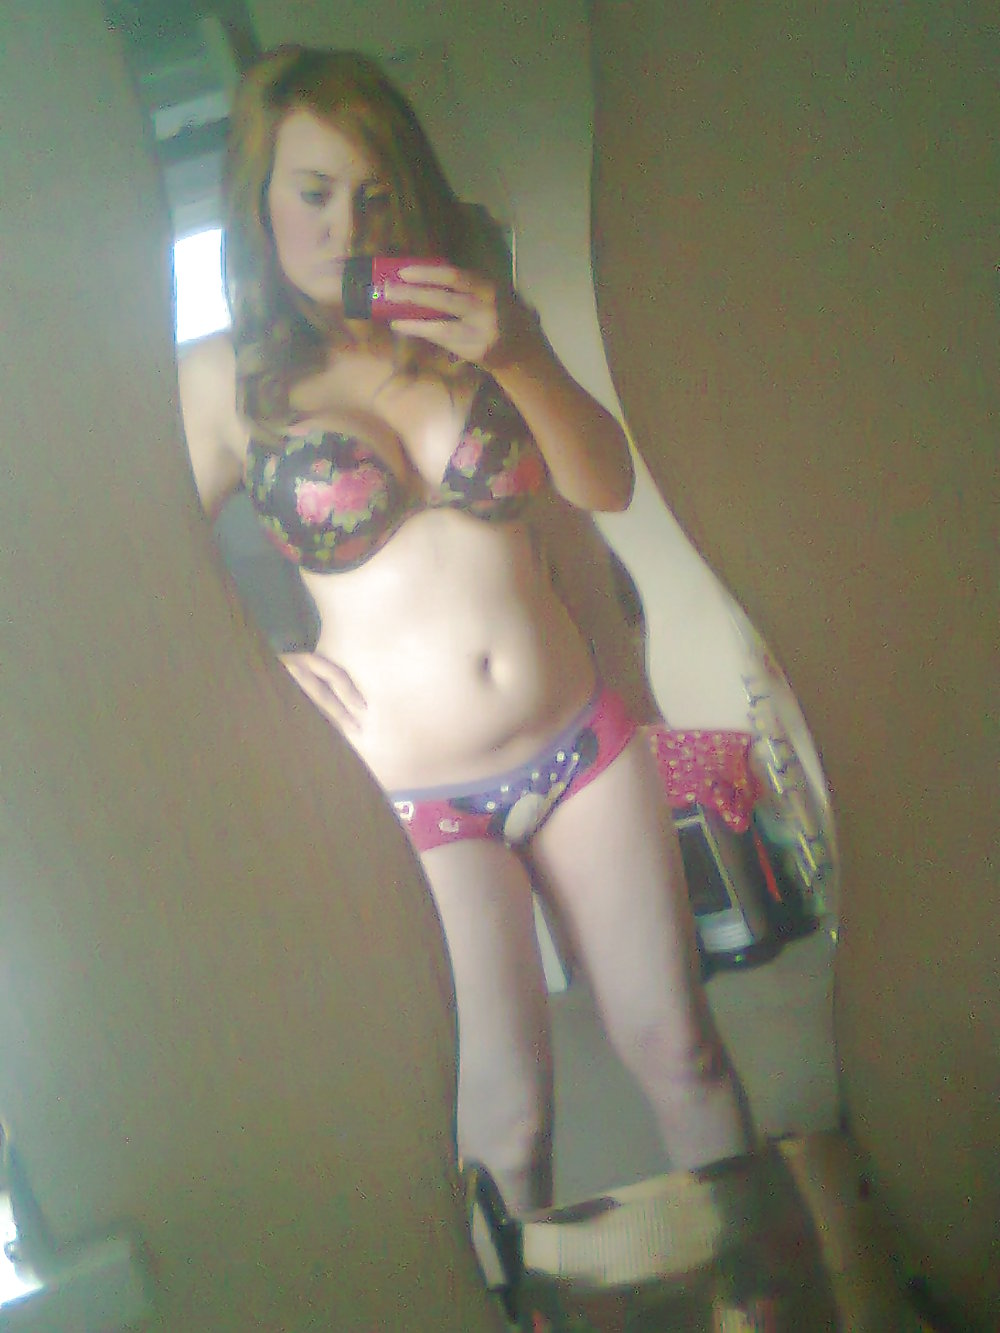 Teen slut from the uk anyone know her? #10869699